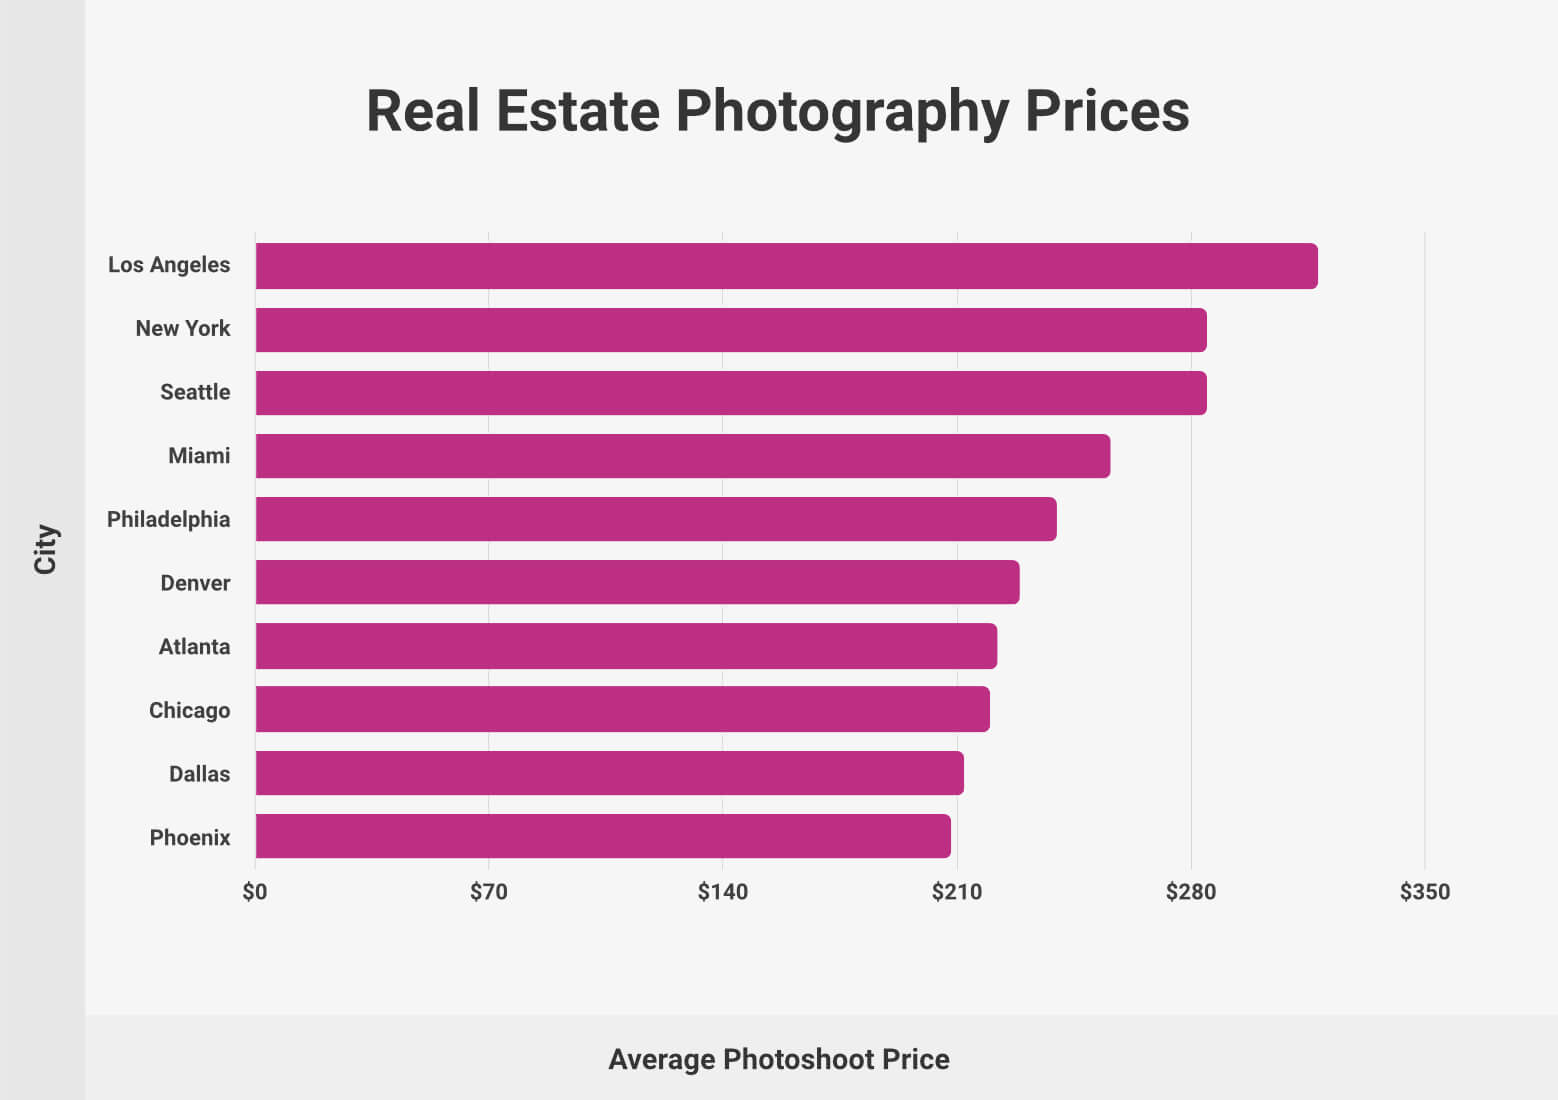 Real Estate Photography Prices in U.S.